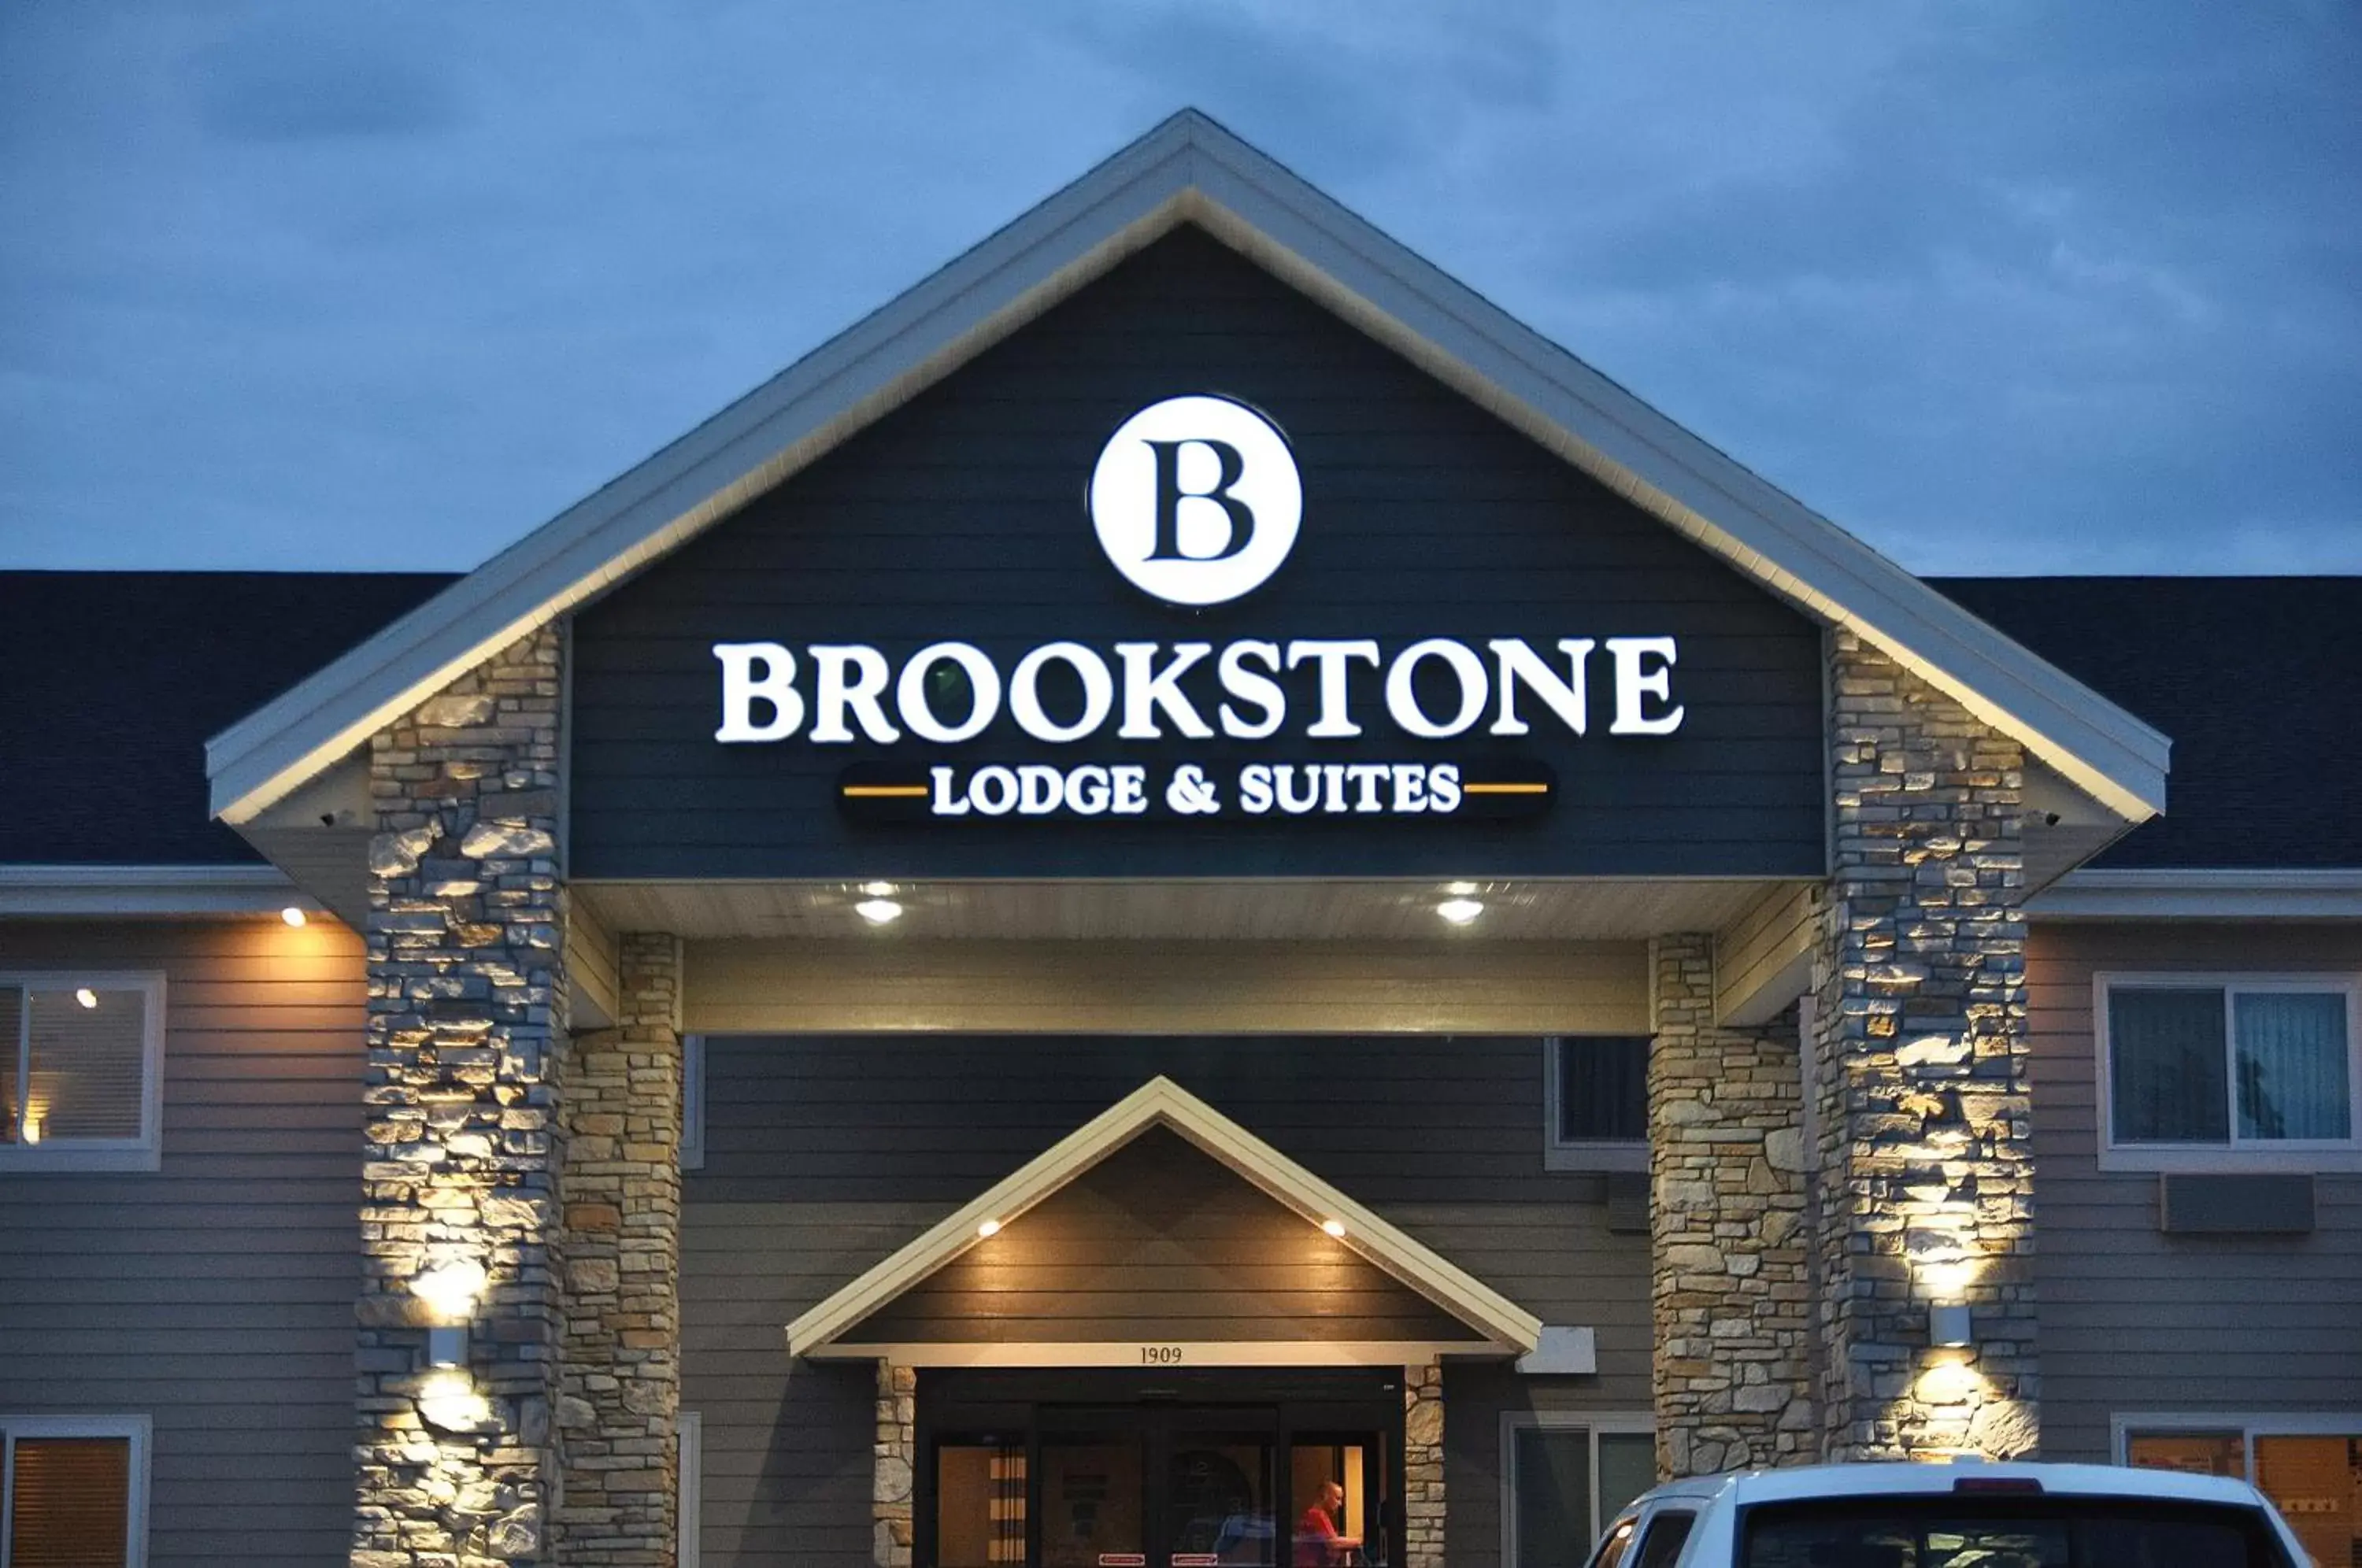 Facade/Entrance in Brookstone Lodge & Suites